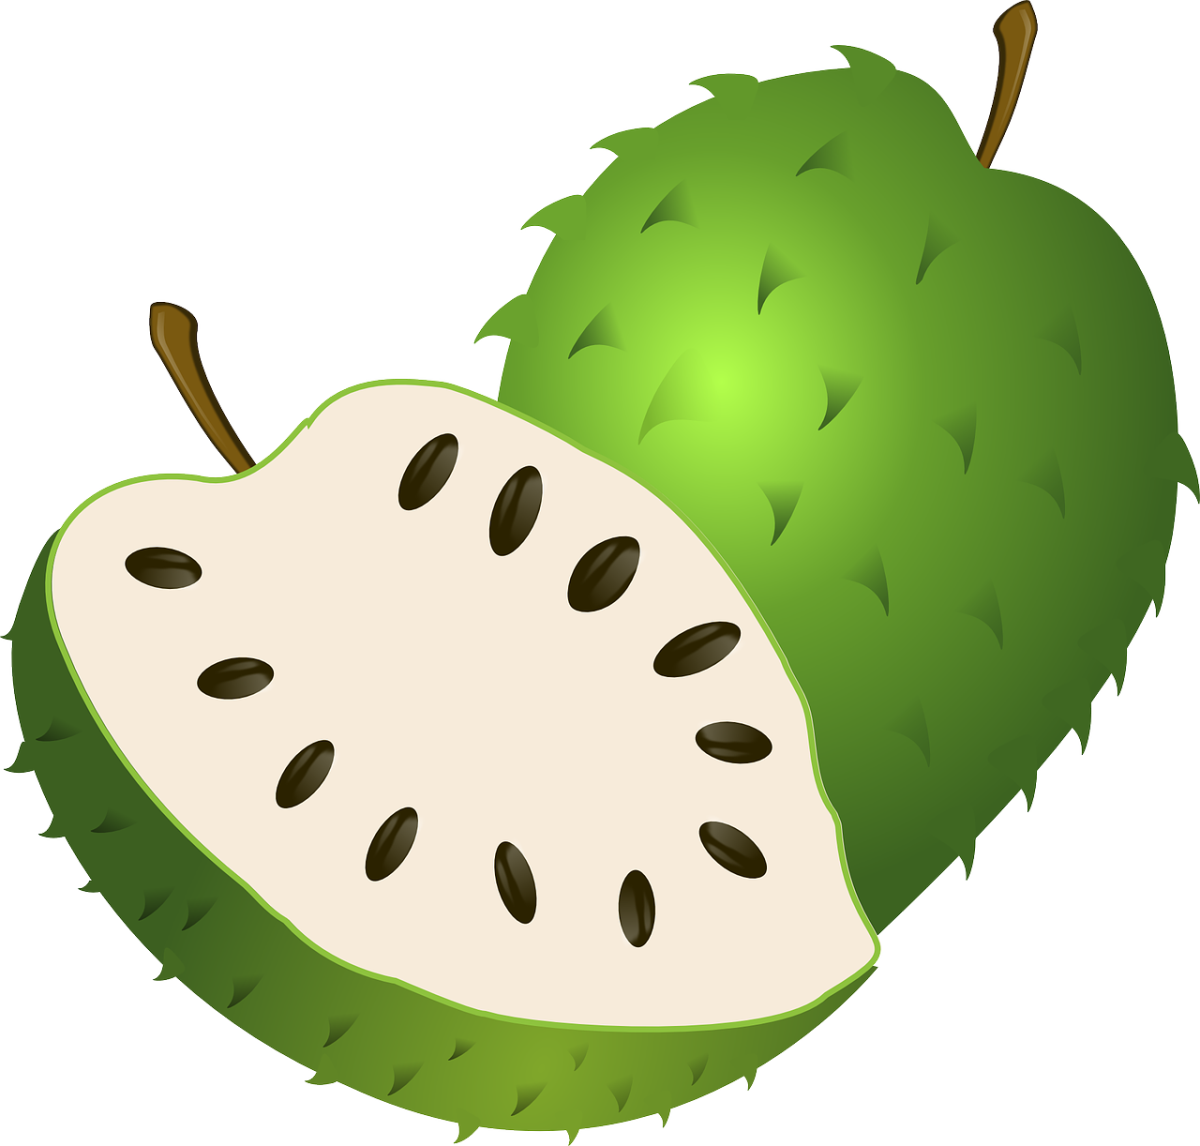 15 Health Benefits Of Guyabano Soursop Leaves Hubpages